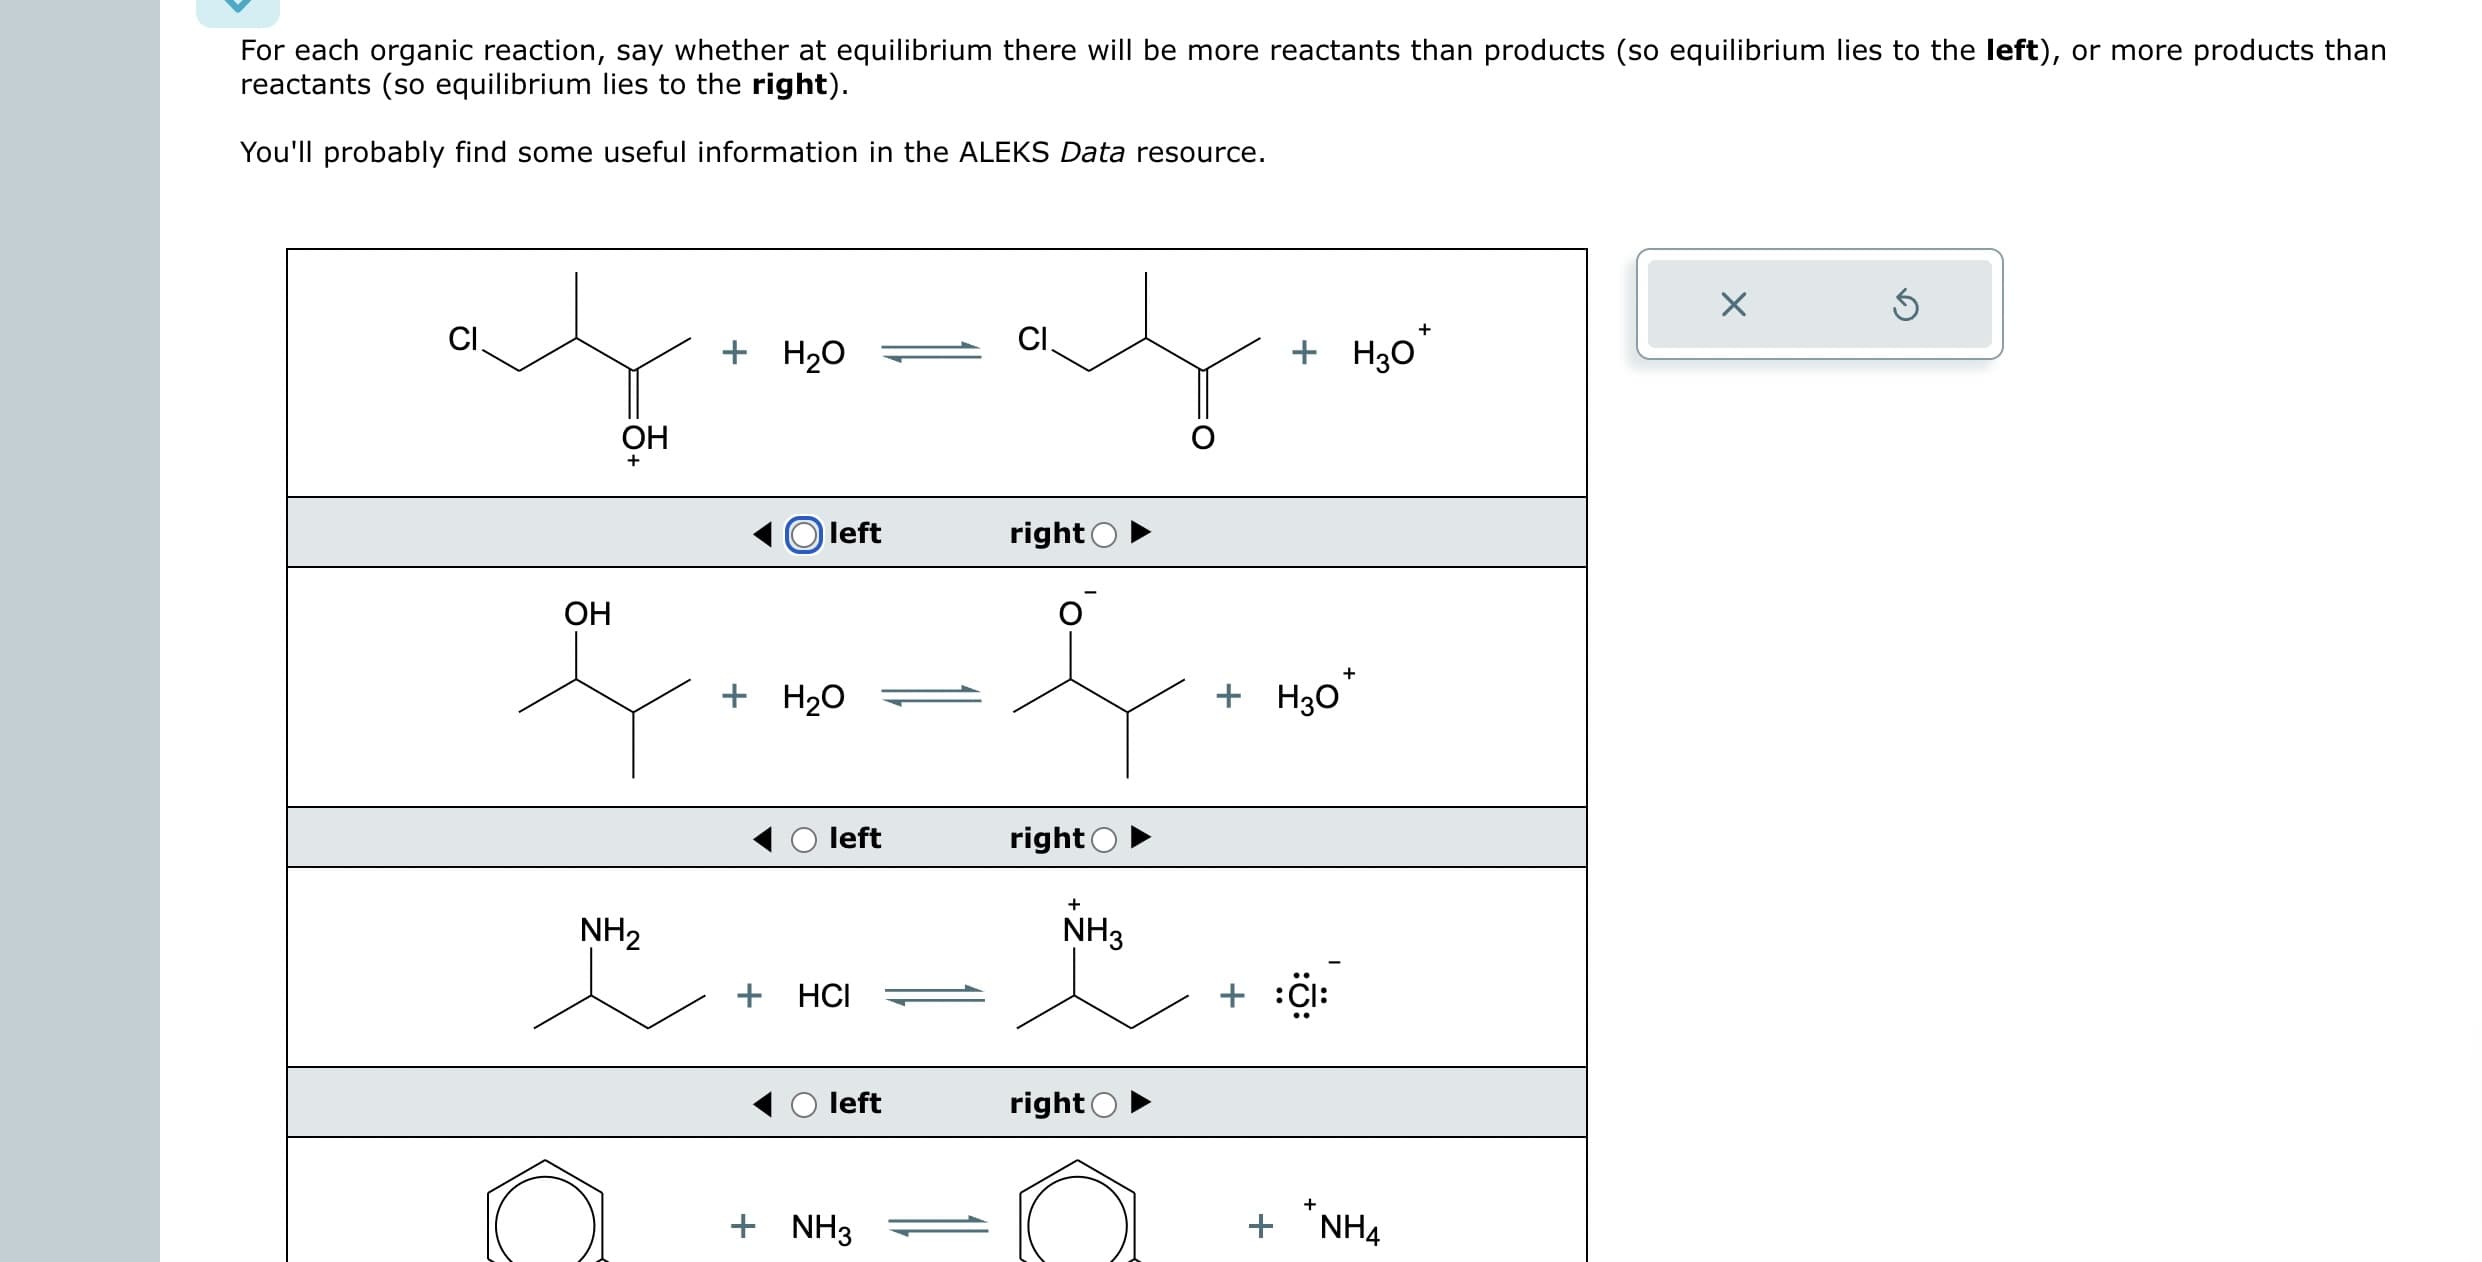 For each organic reaction, say whether at equilibrium there will be more reactants than products (so equilibrium lies to the left), or more products than
reactants (so equilibrium lies to the right).
You'll probably find some useful information in the ALEKS Data resource.
ayor
+ H₂O
OH
CI
OH
NH₂
left
+ H₂O
left
+ HCI
left
+ NH3
CI
right O
right
NH3
right
+
+
+ H₂0*
+ H30
+
+
+
NH4
Ś